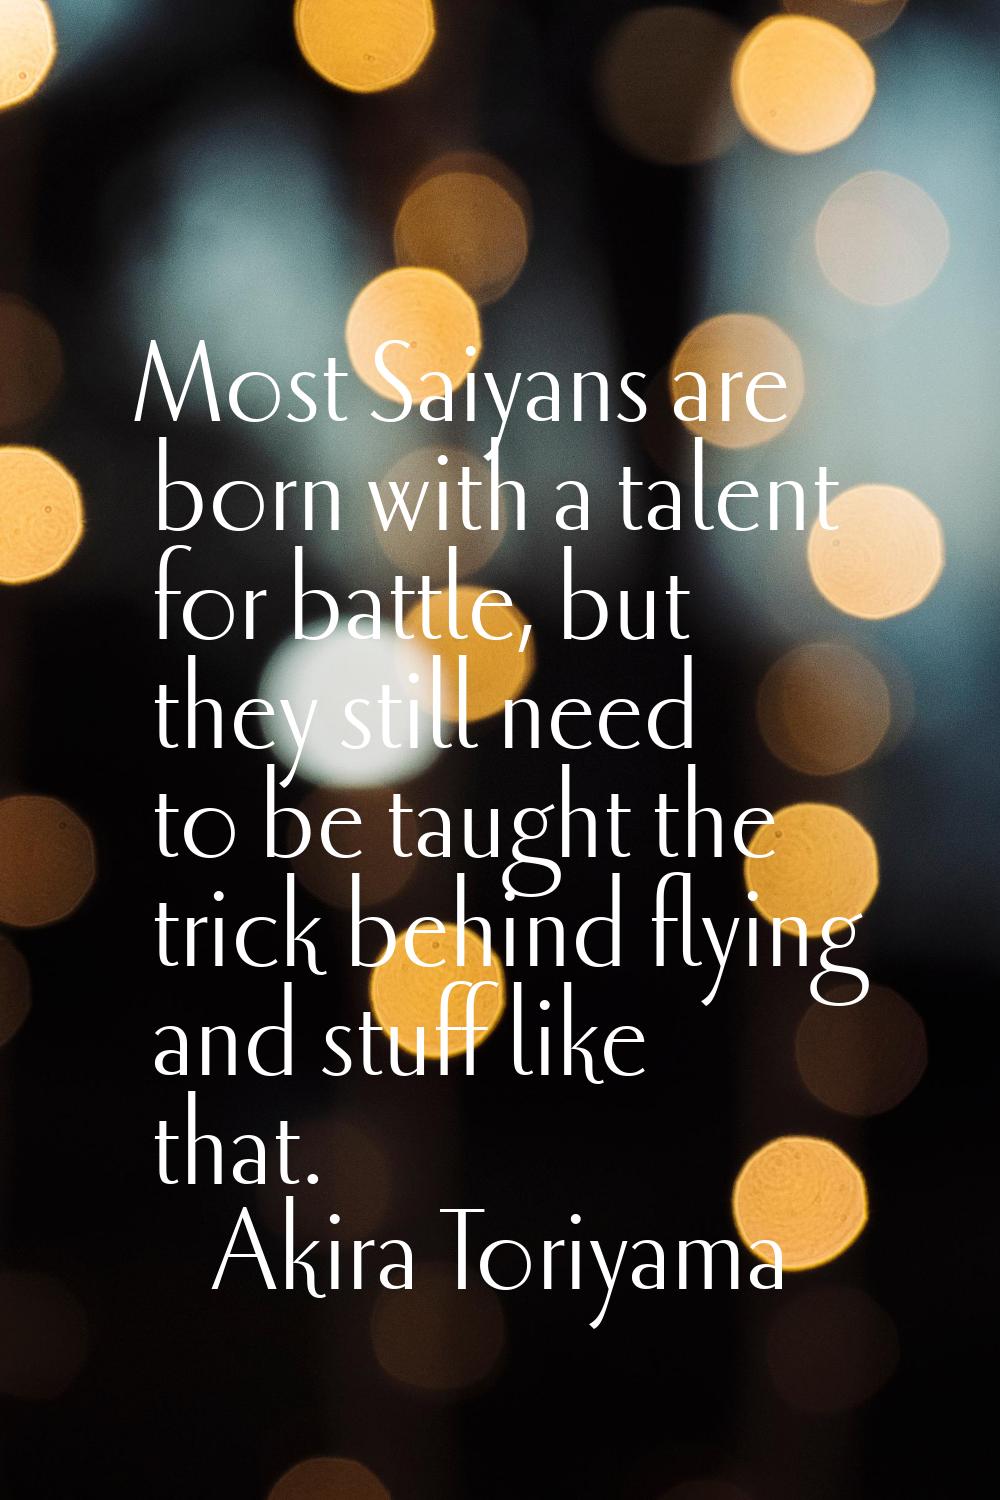 Most Saiyans are born with a talent for battle, but they still need to be taught the trick behind f